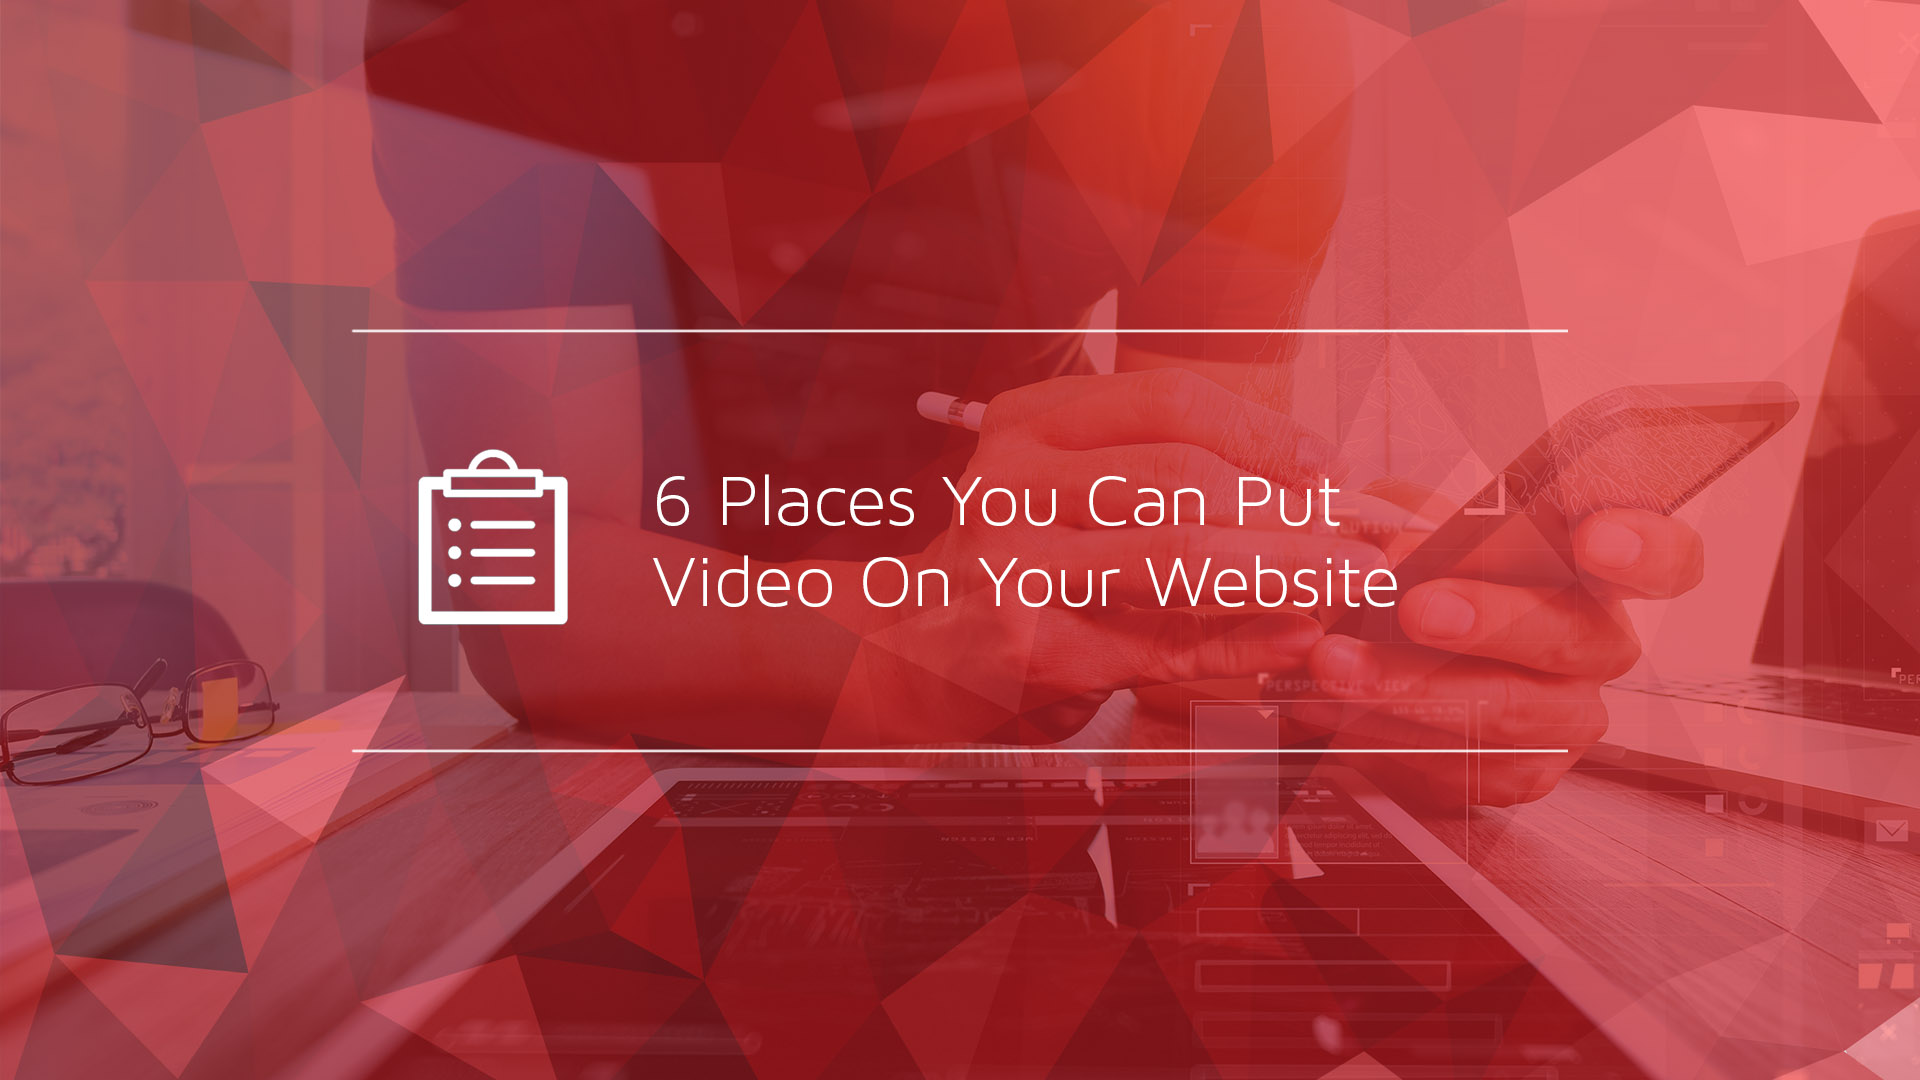 6 Places You Can Put Video On Your Website-1.jpg